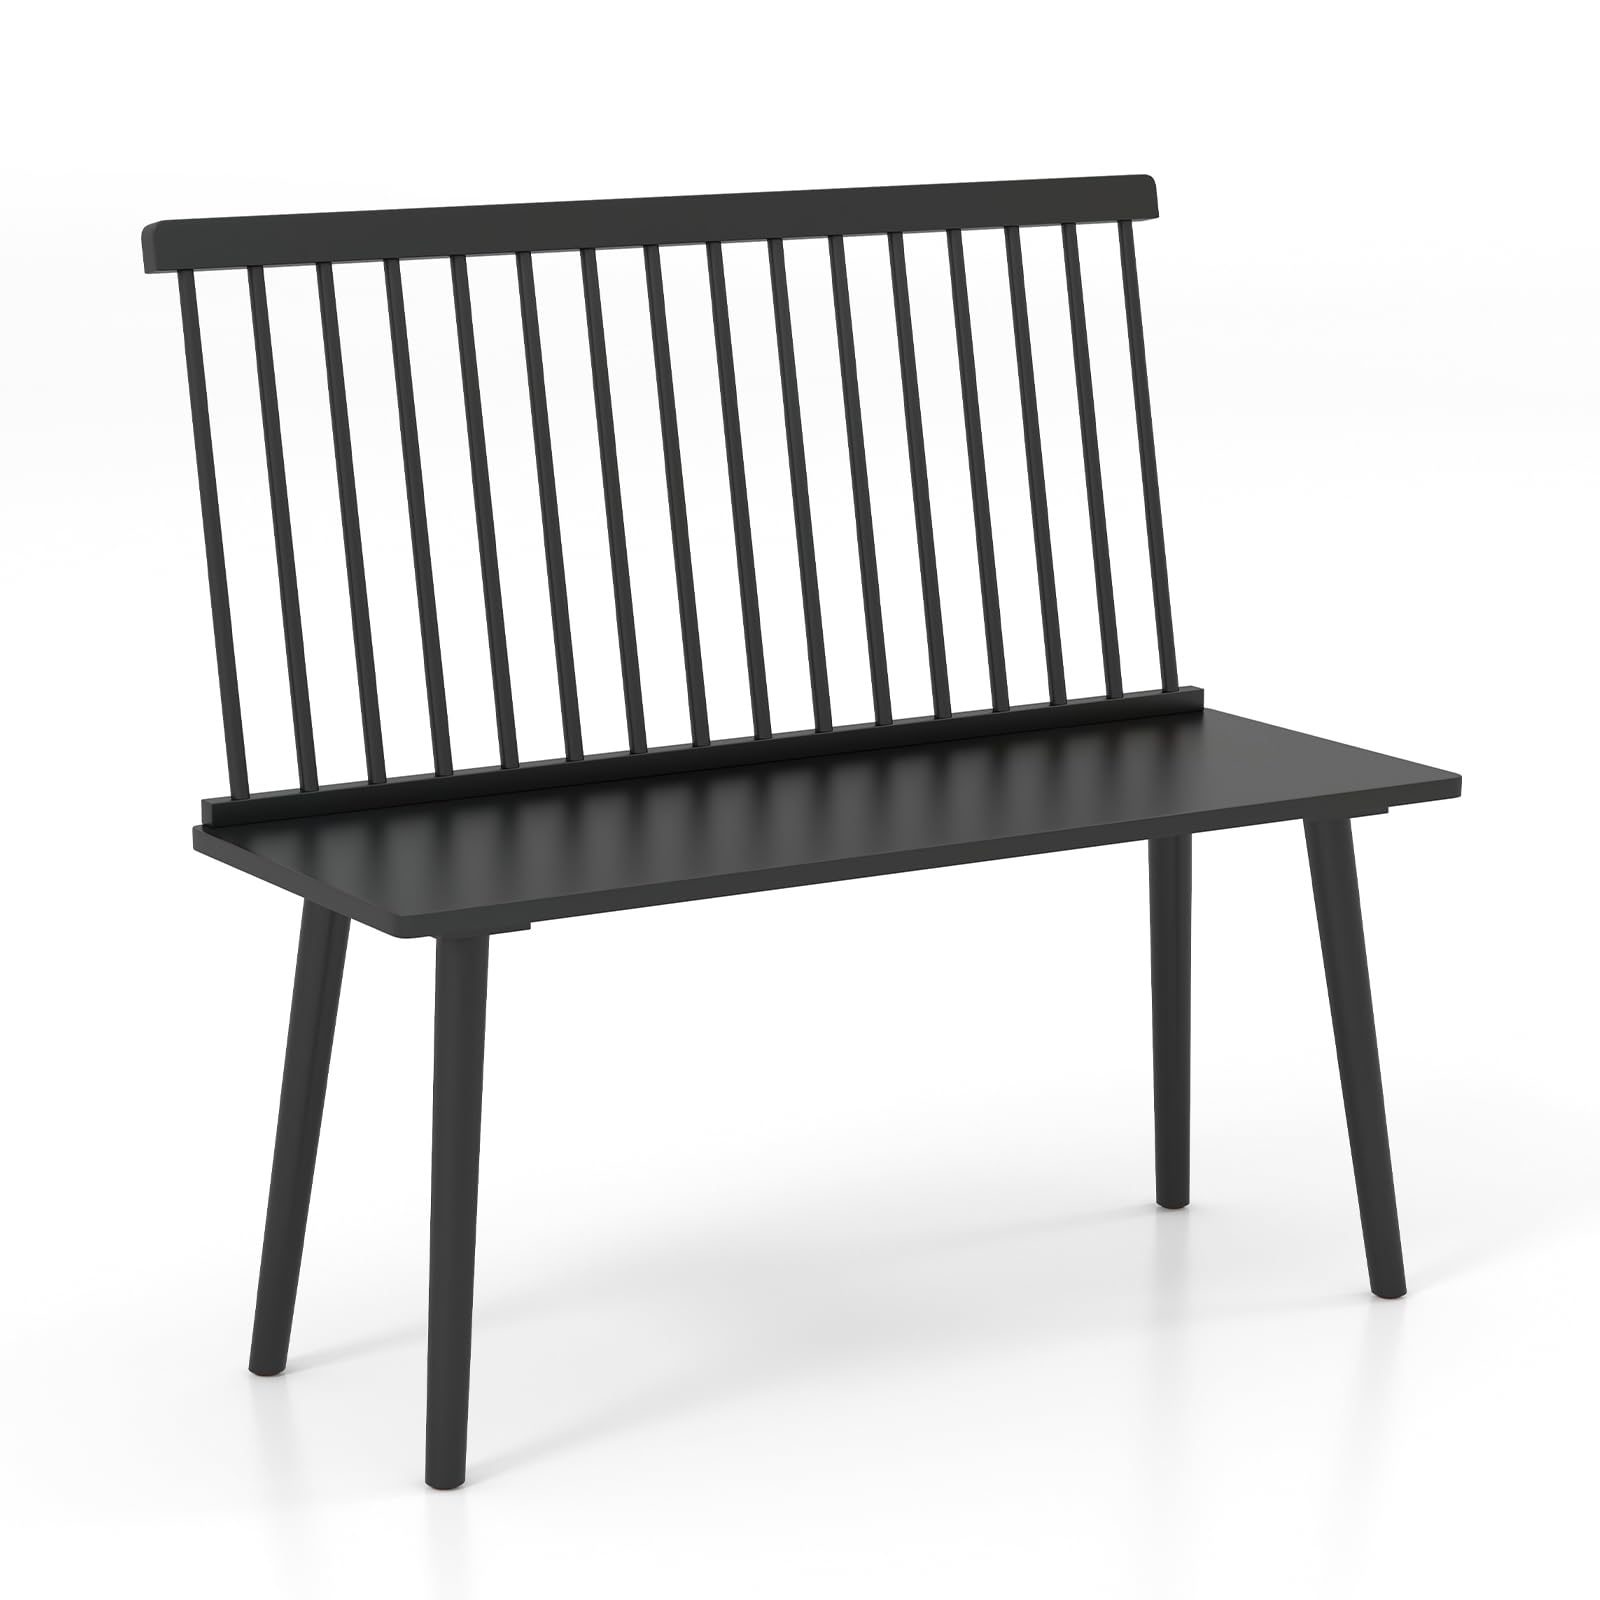 Giantex Entryway Bench for 2, Windsor Bench with Spindle Back & Anti-Slip Foot Pads